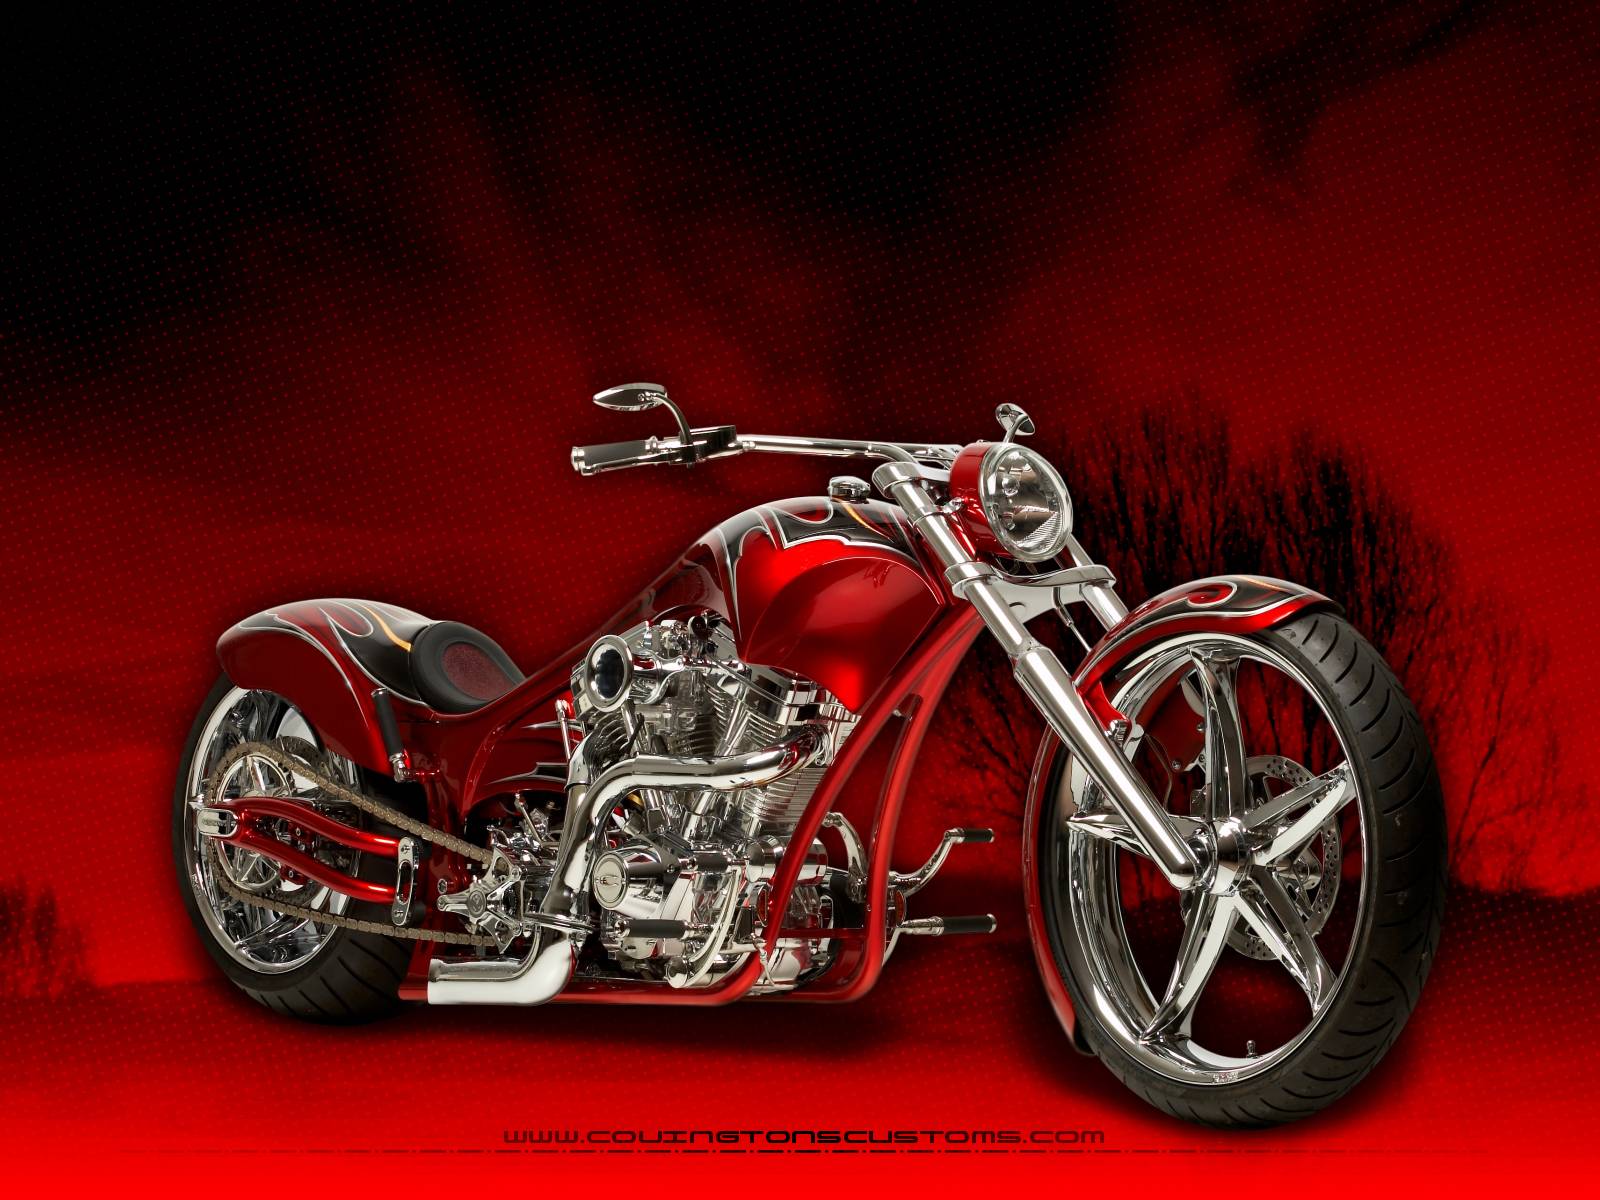 Covingtons Motorcycle WallPapers Gallery